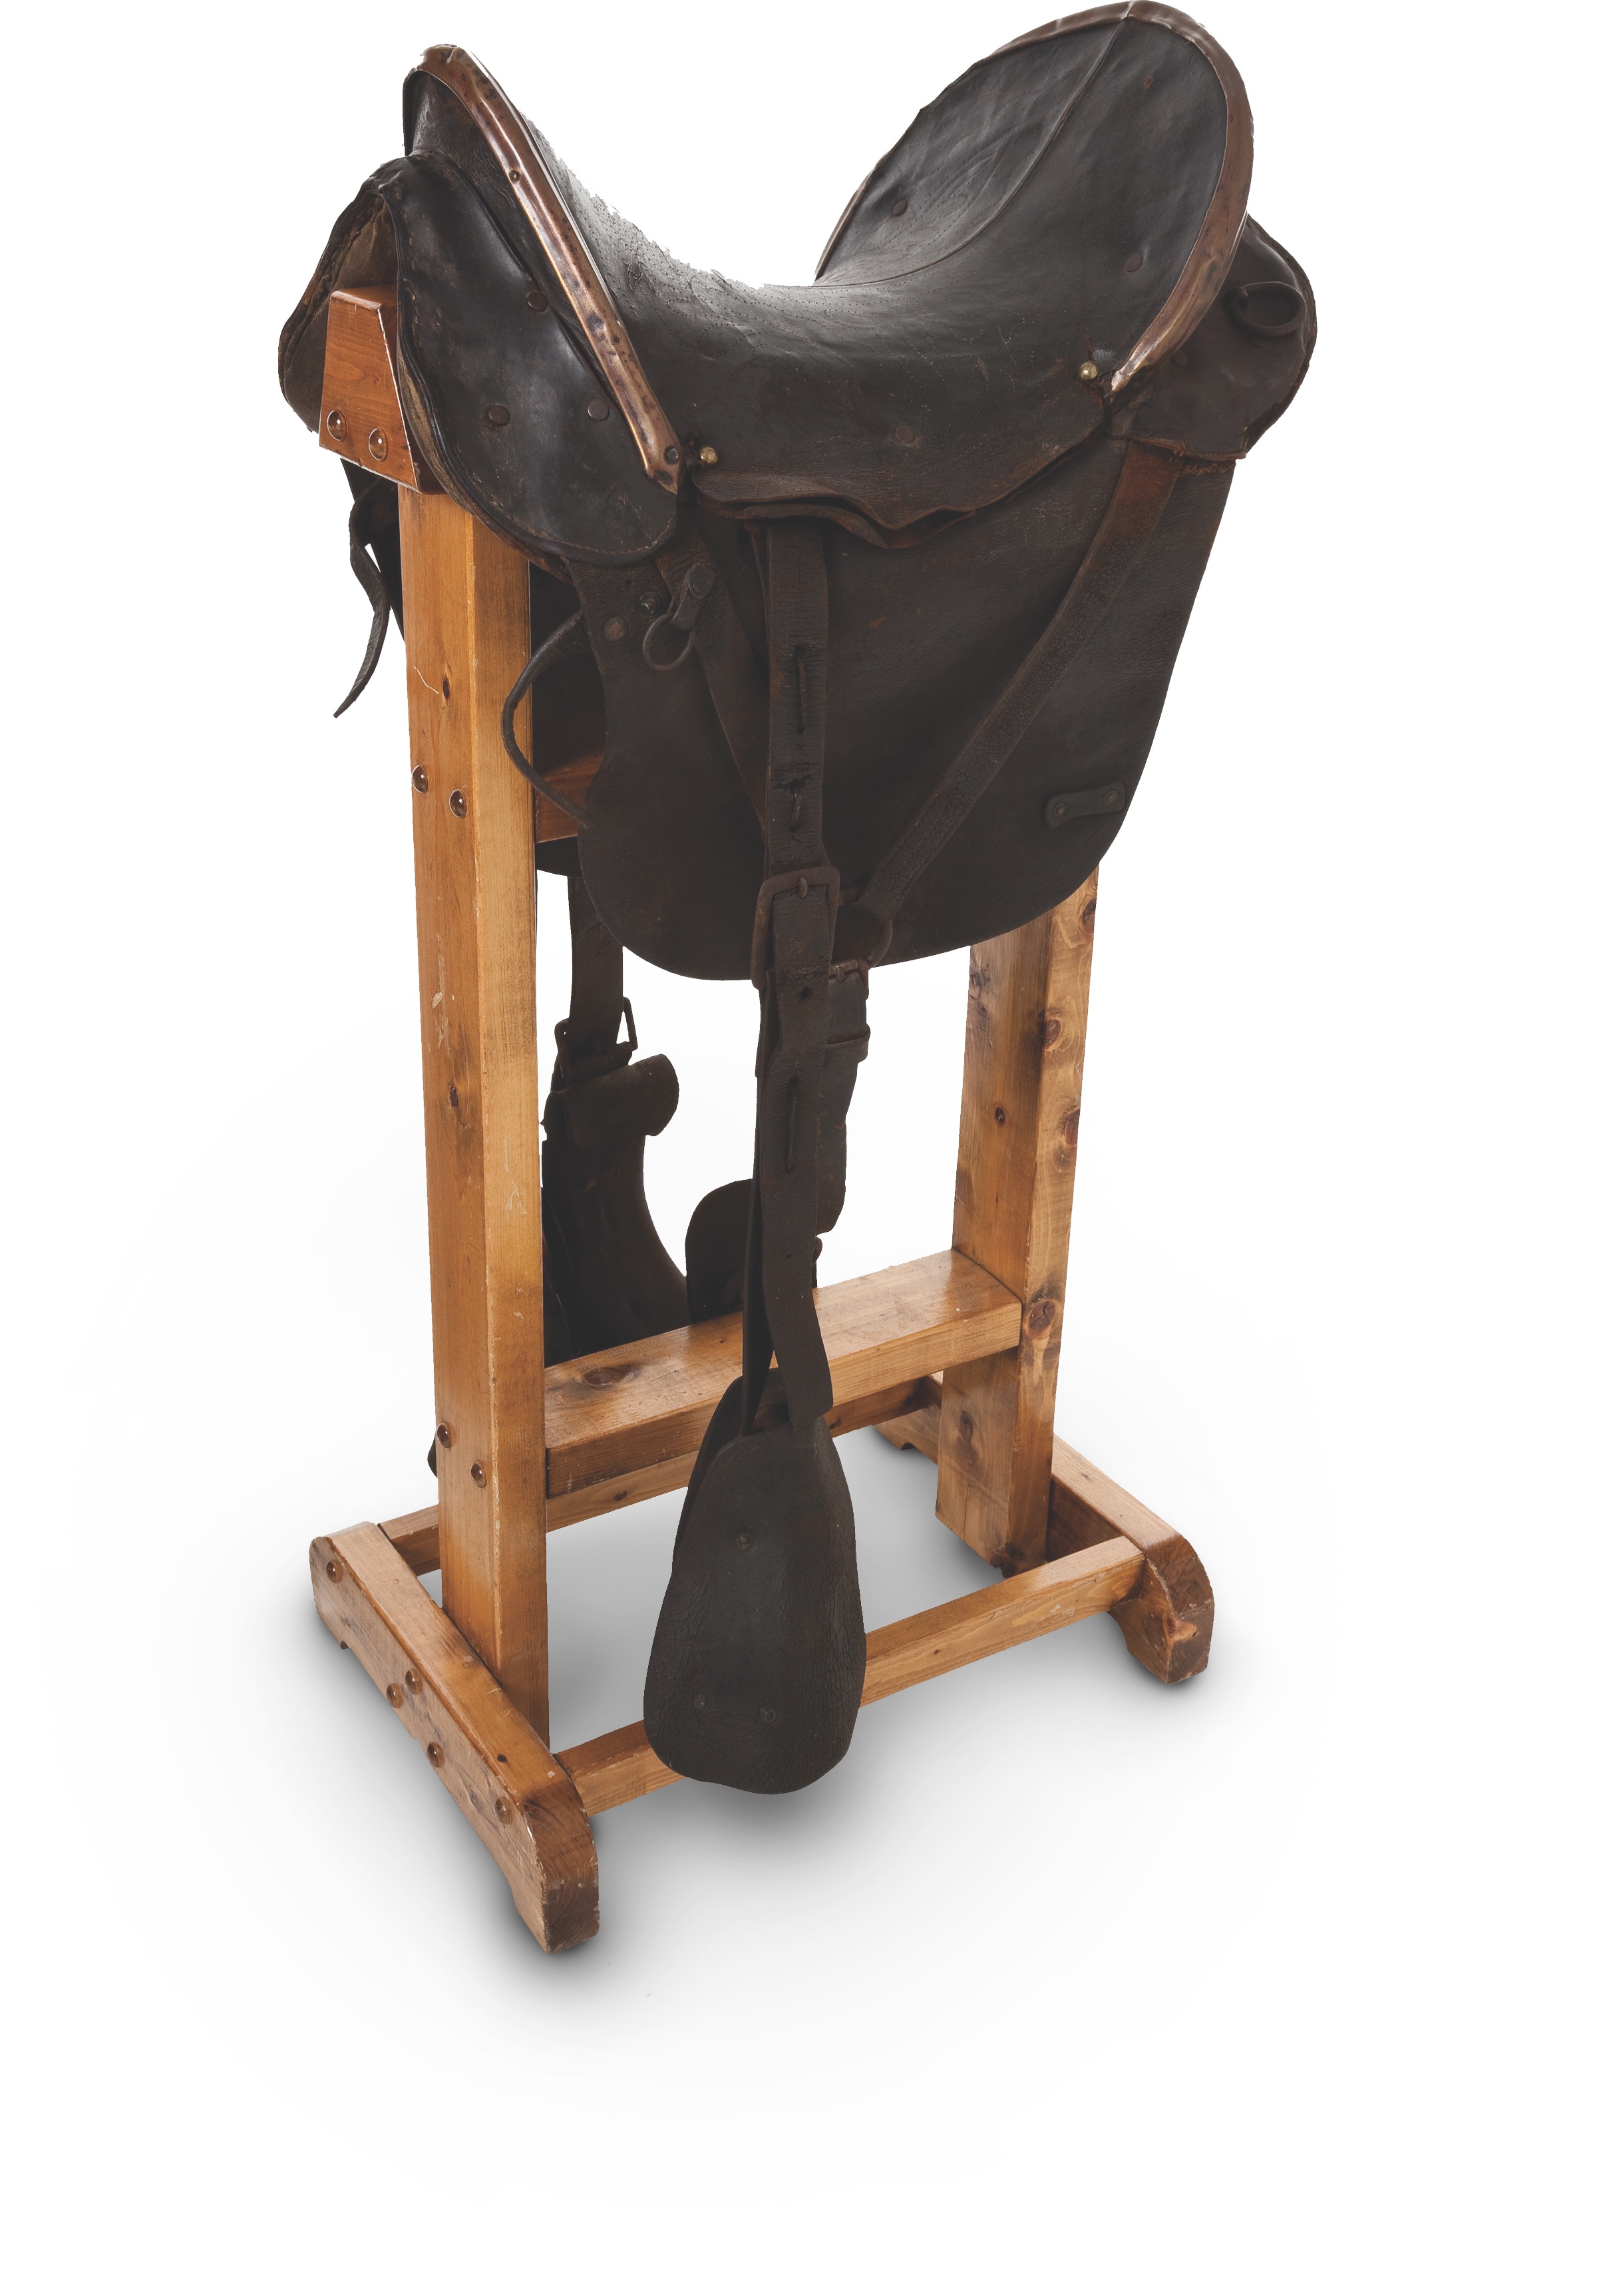 nutcracker seat A document in Von Fritsch’s pension file states he injured himself on his McClellan saddle at Chancellorsville, perhaps a leather-covered officer’s grade version of the saddle, like this one. (Heritage Auctions, Dallas)